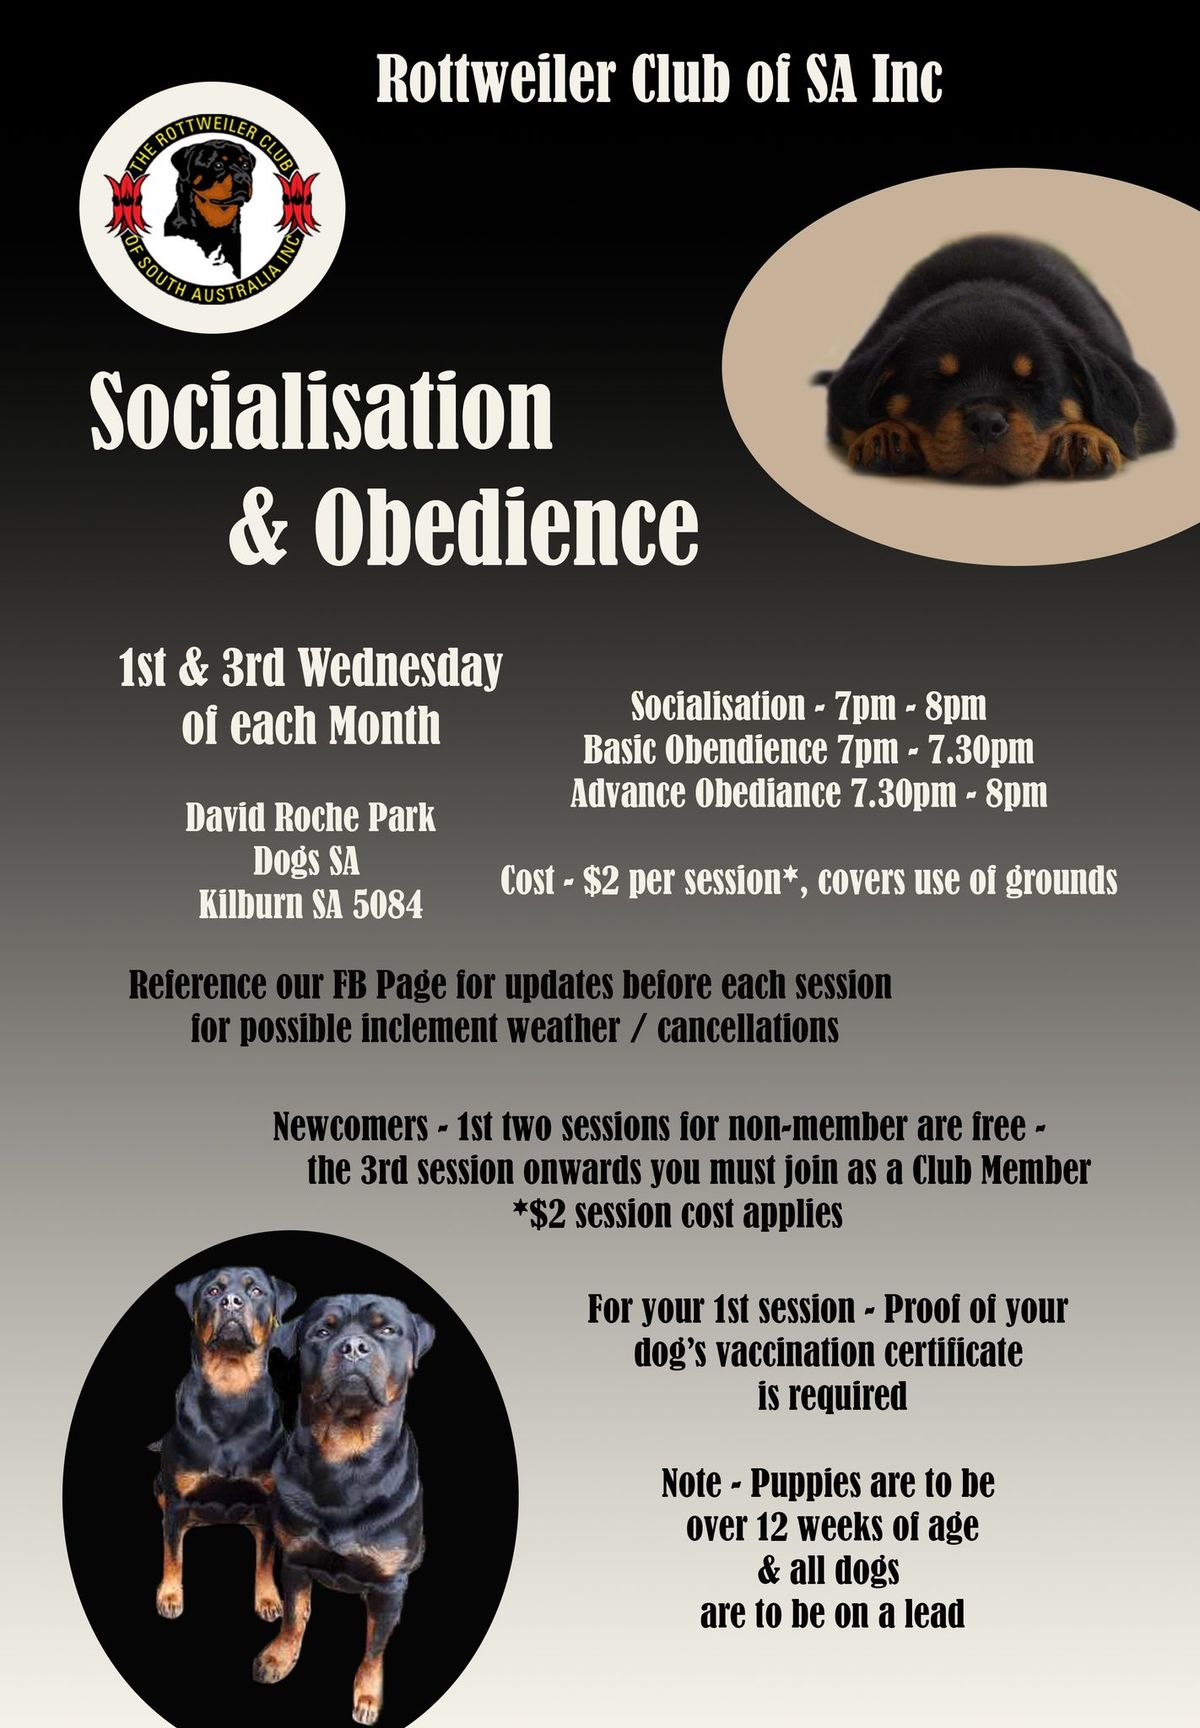 RCSA Socialisation & Obedience